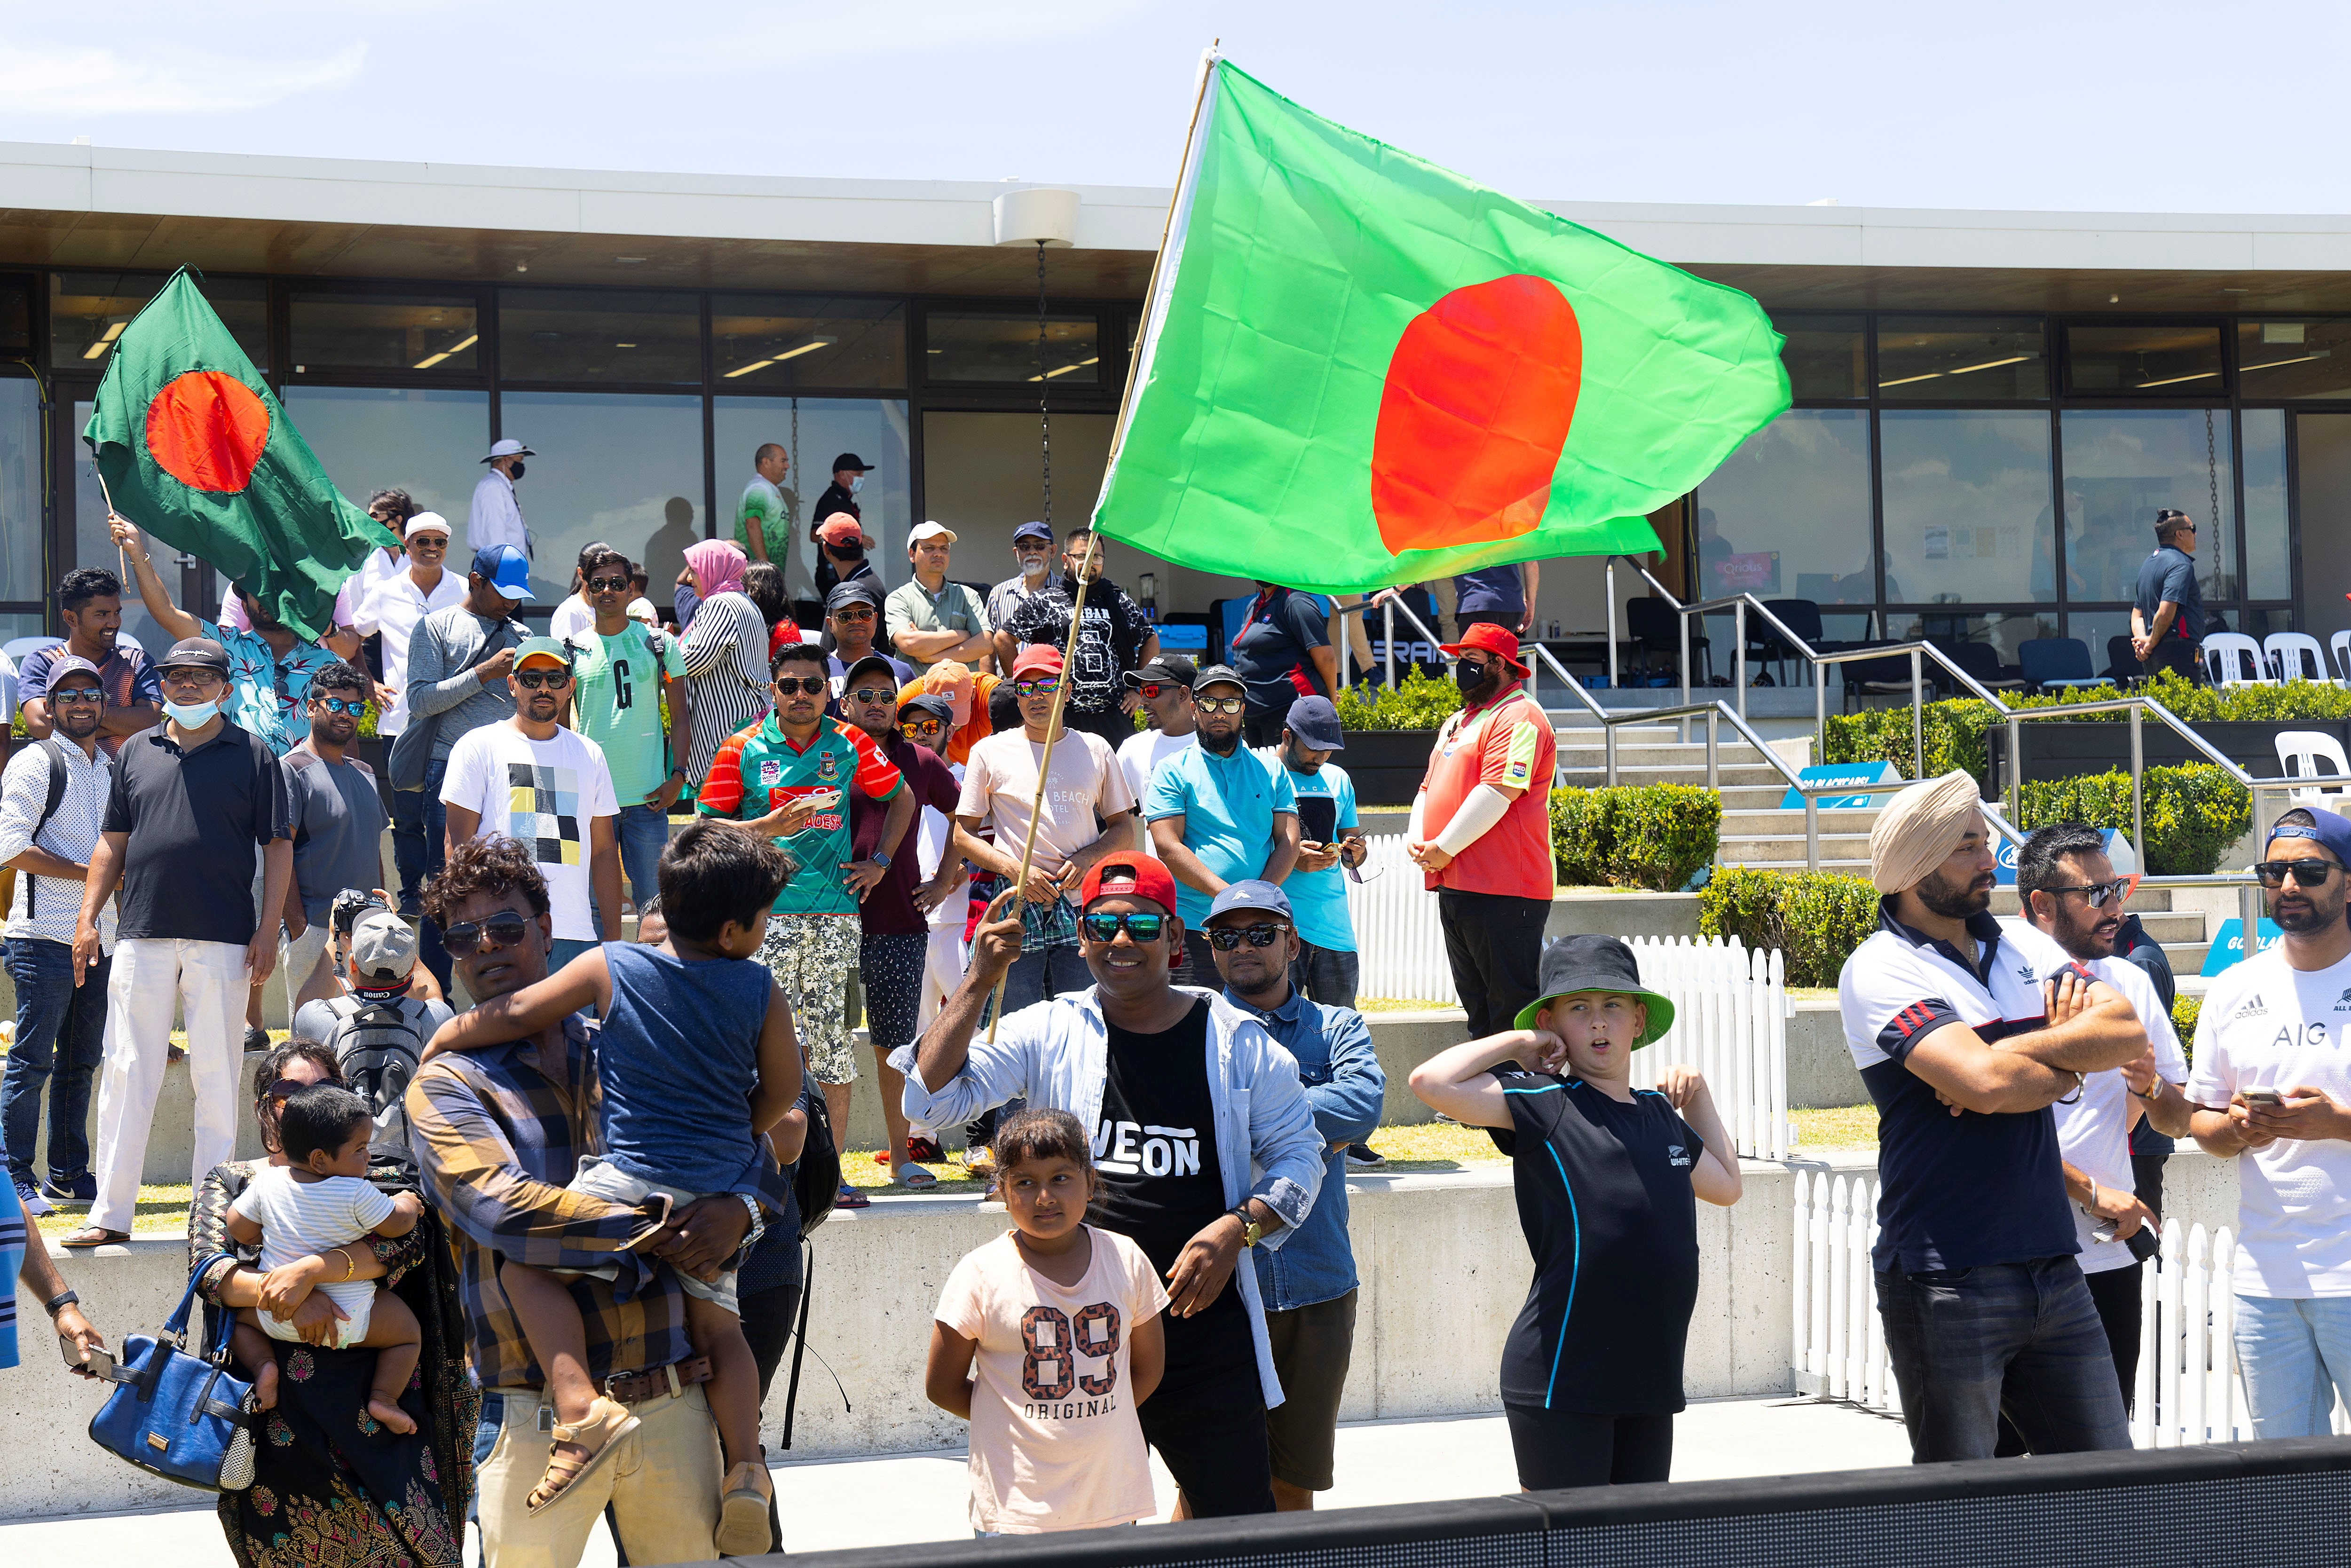 Bangladesh fans celebrate after the team won during play on day five of the first cricket test between Bangladesh and New Zealand at Bay Oval in Mount Maunganui, New Zealand, Wednesday, Jan. 5, 2022.